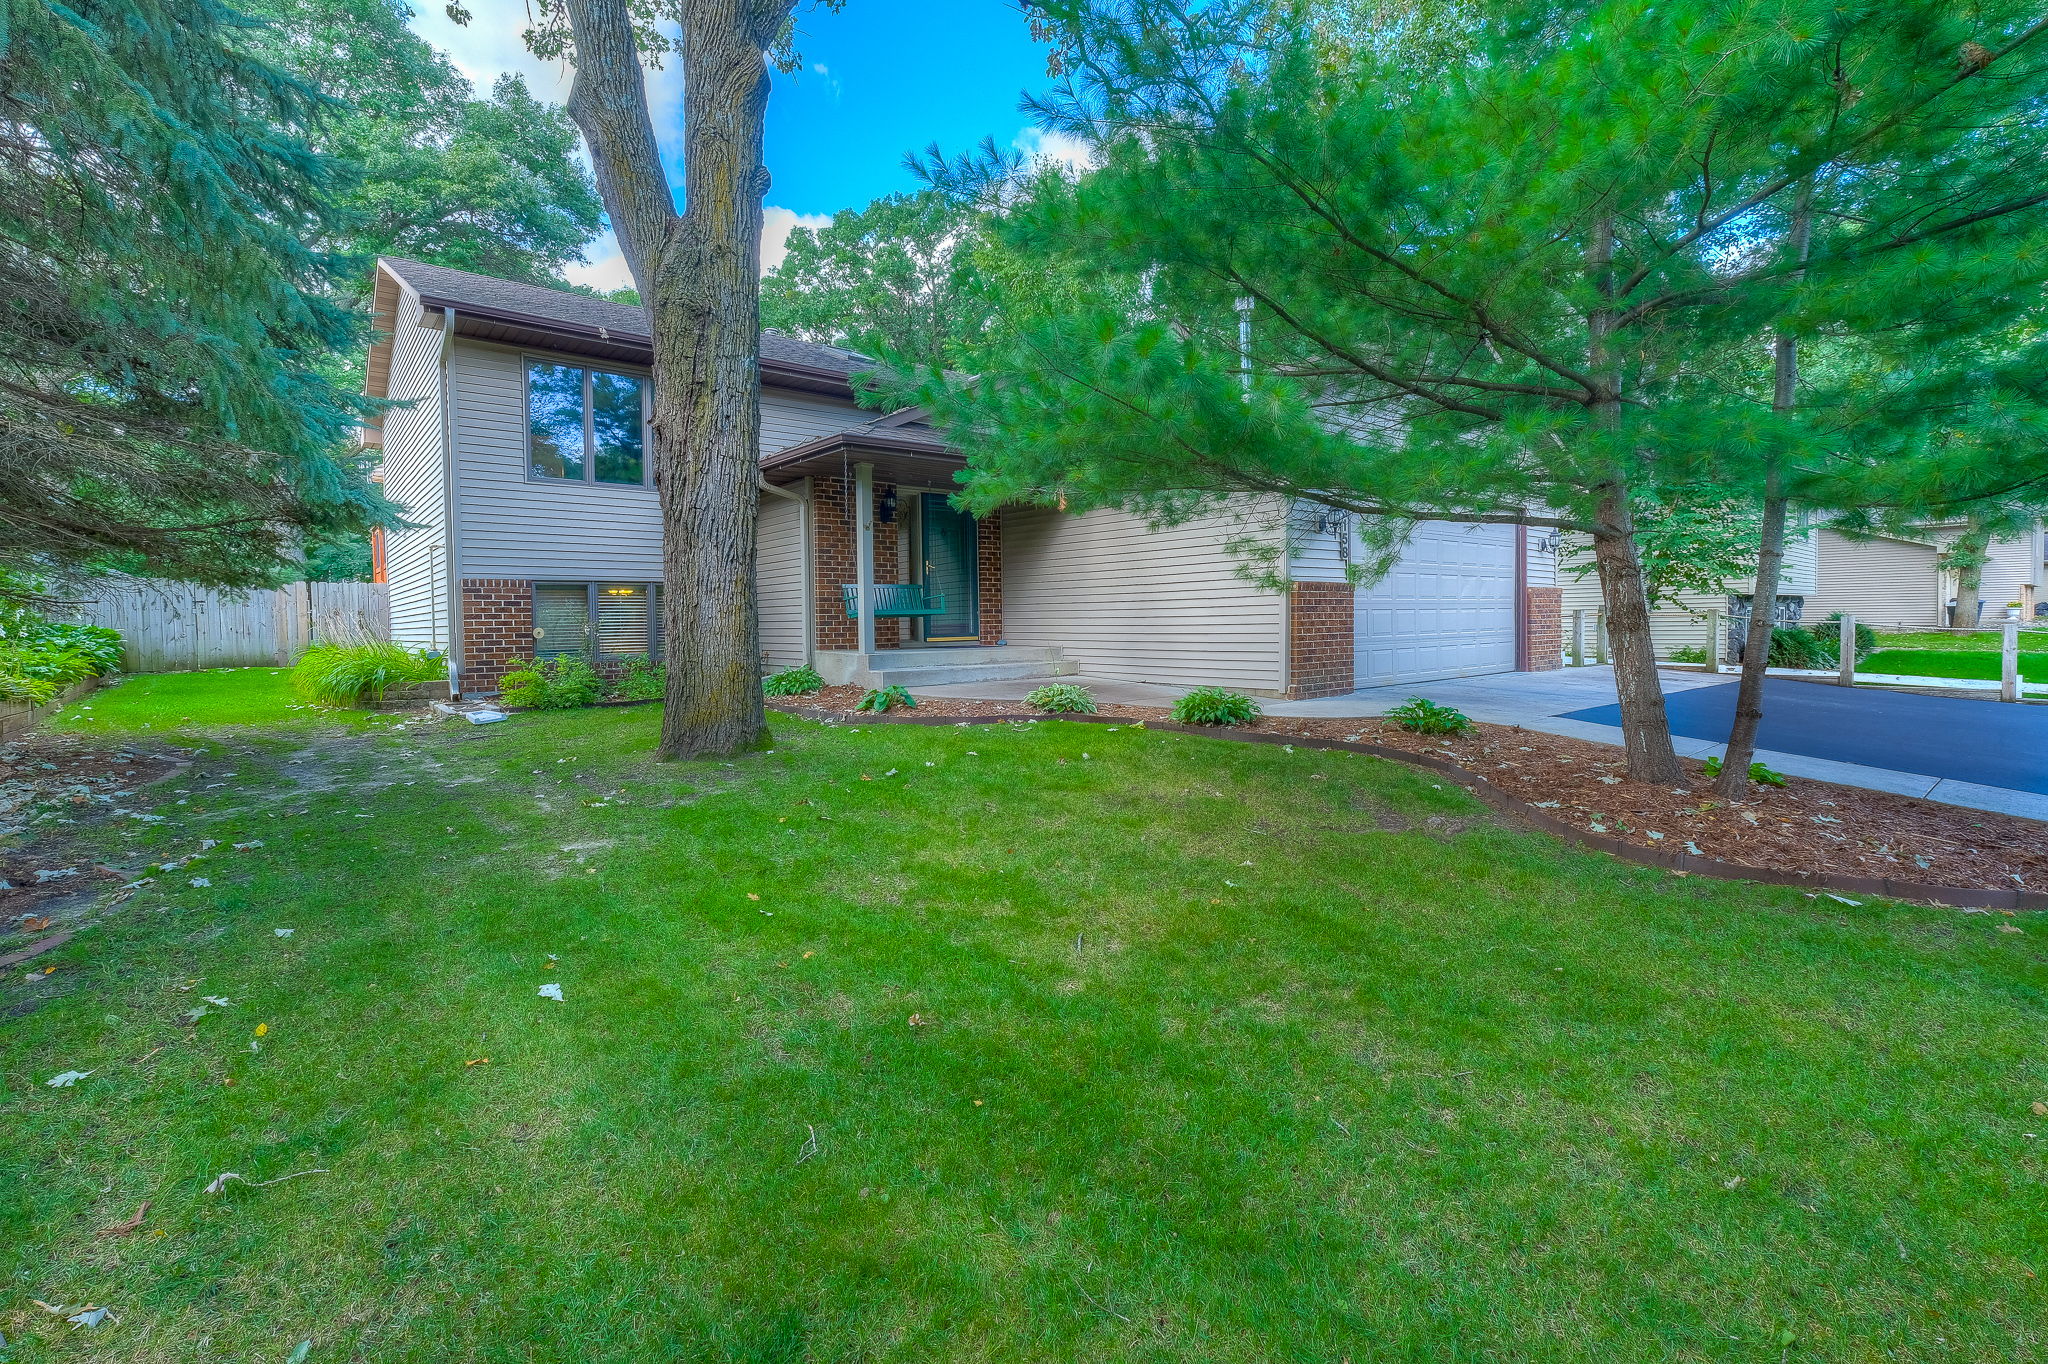  13158 Kerry St. NW, Coon Rapids, MN 55448, US